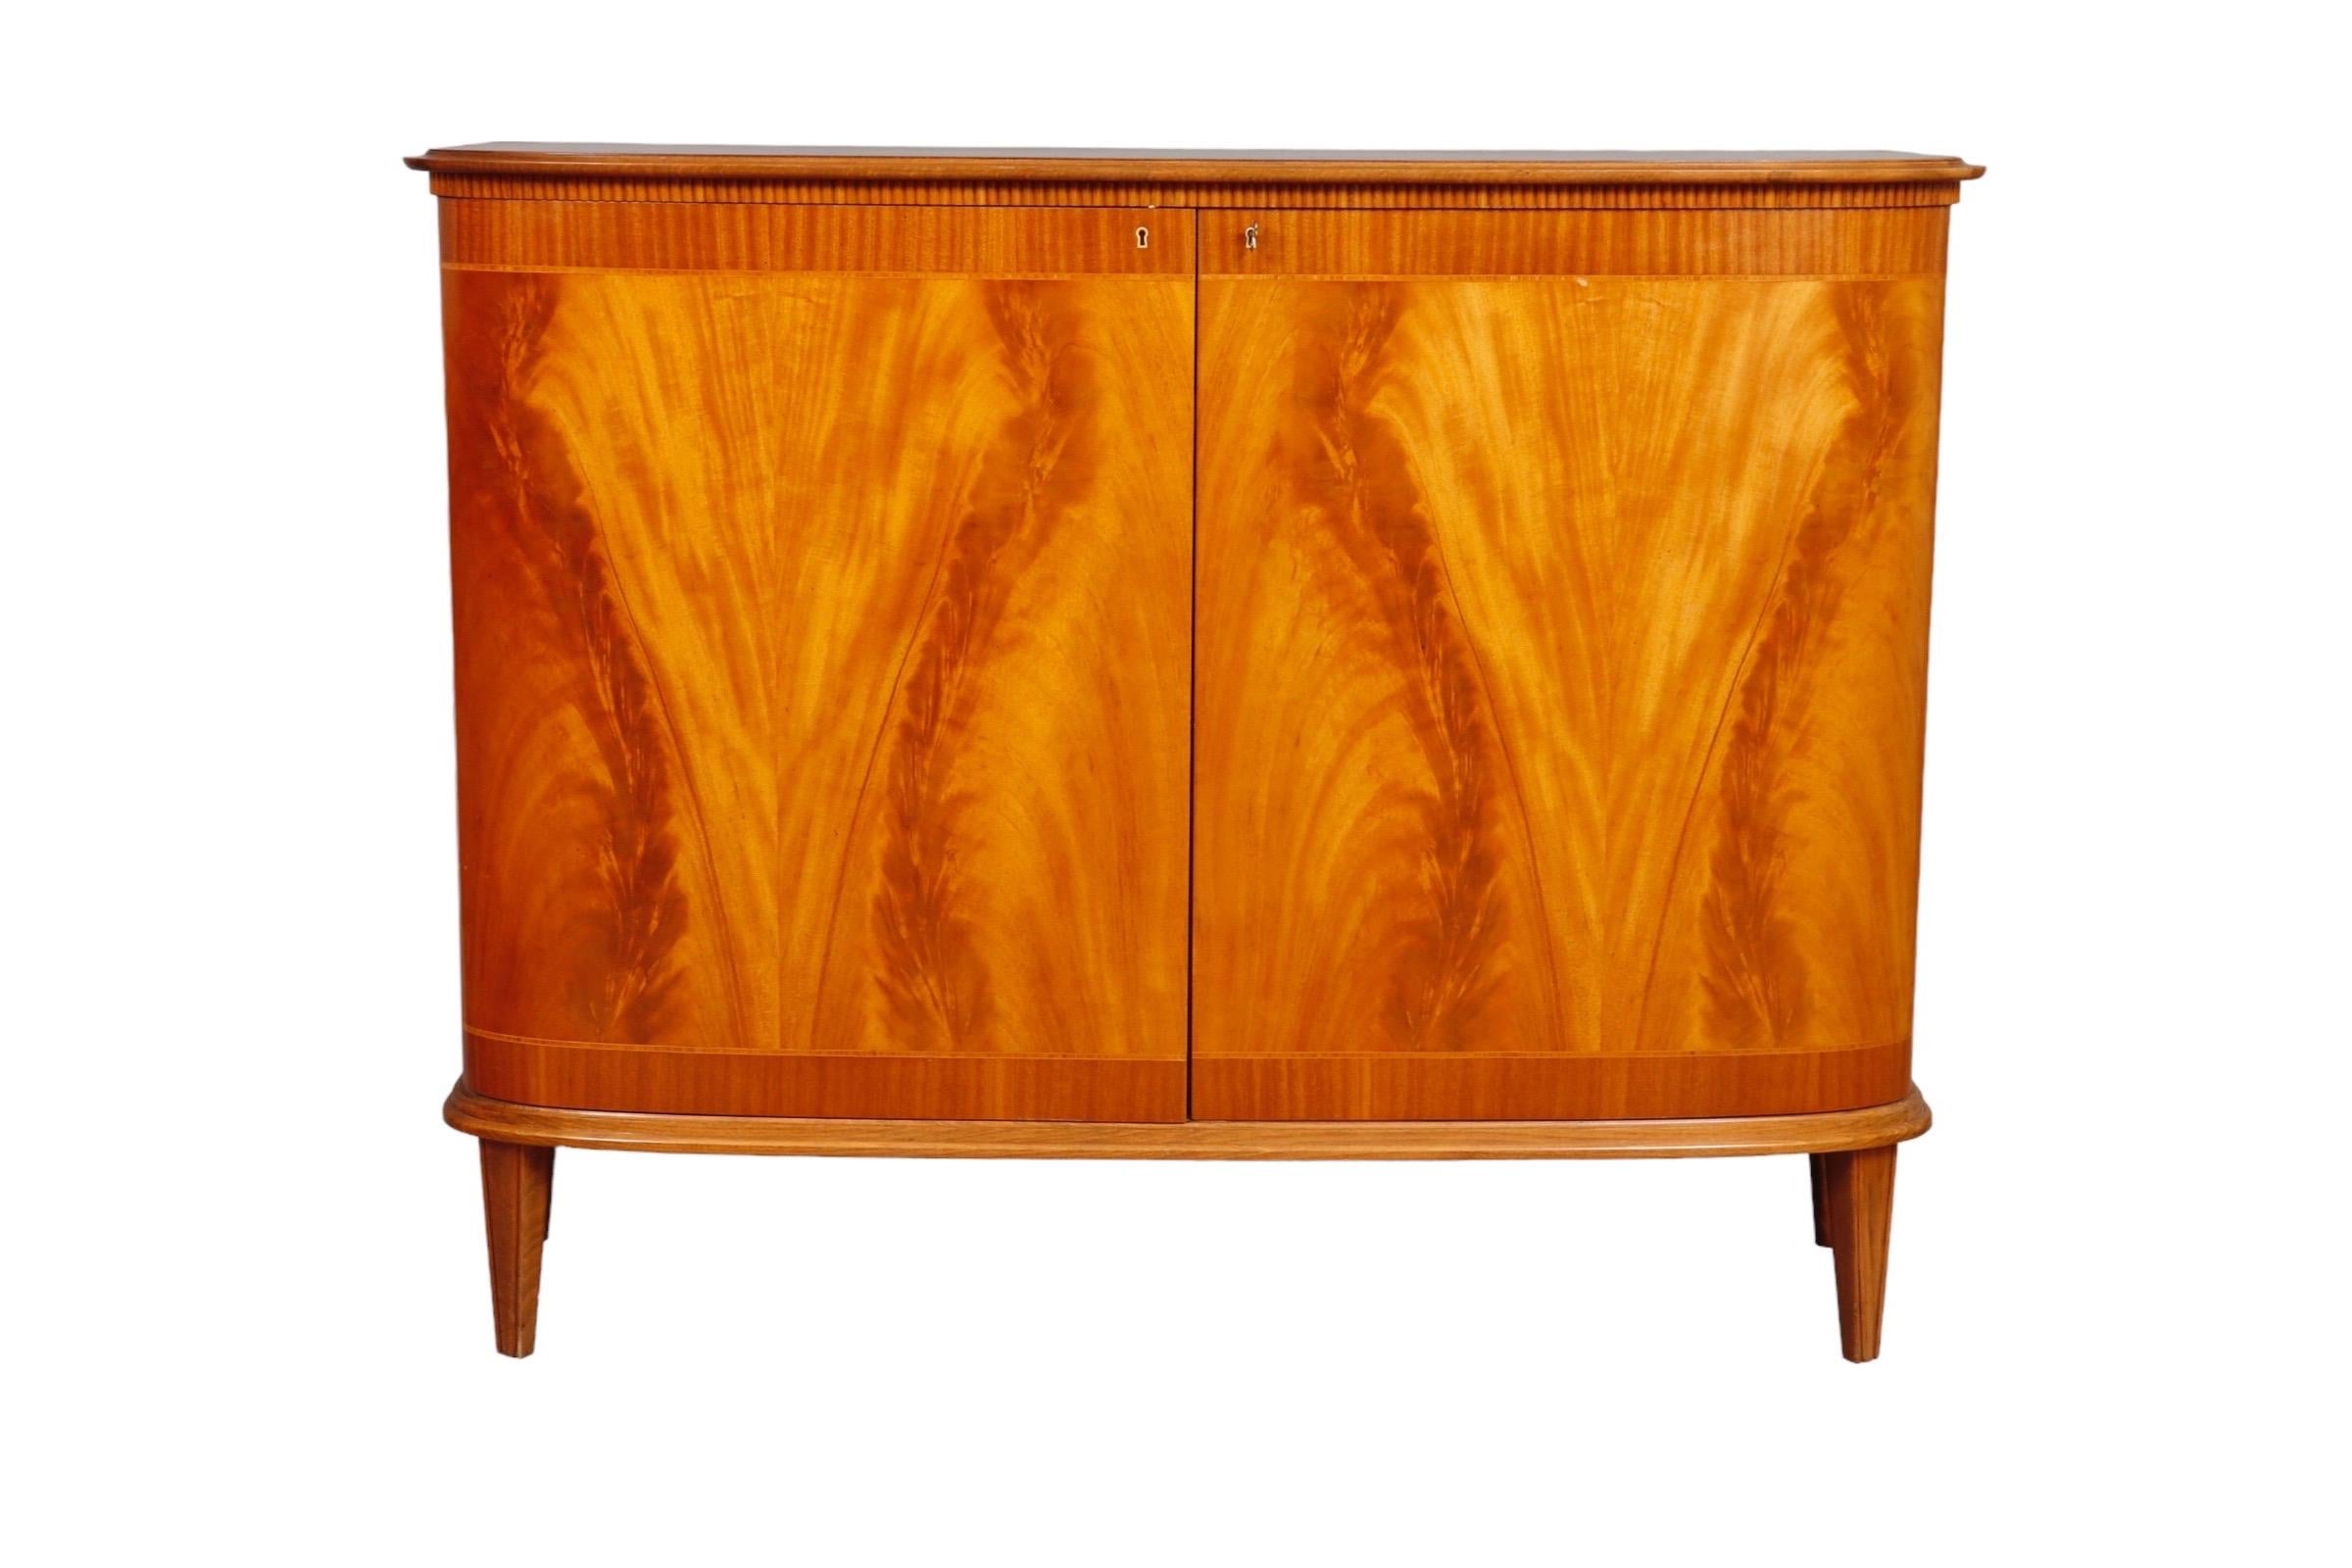 1940’s sideboard by Swedish company Skänk. Stunning flame mahogany veneers decorate inlaid bentwood cabinet doors. Inside are three shelves and two small drawers.